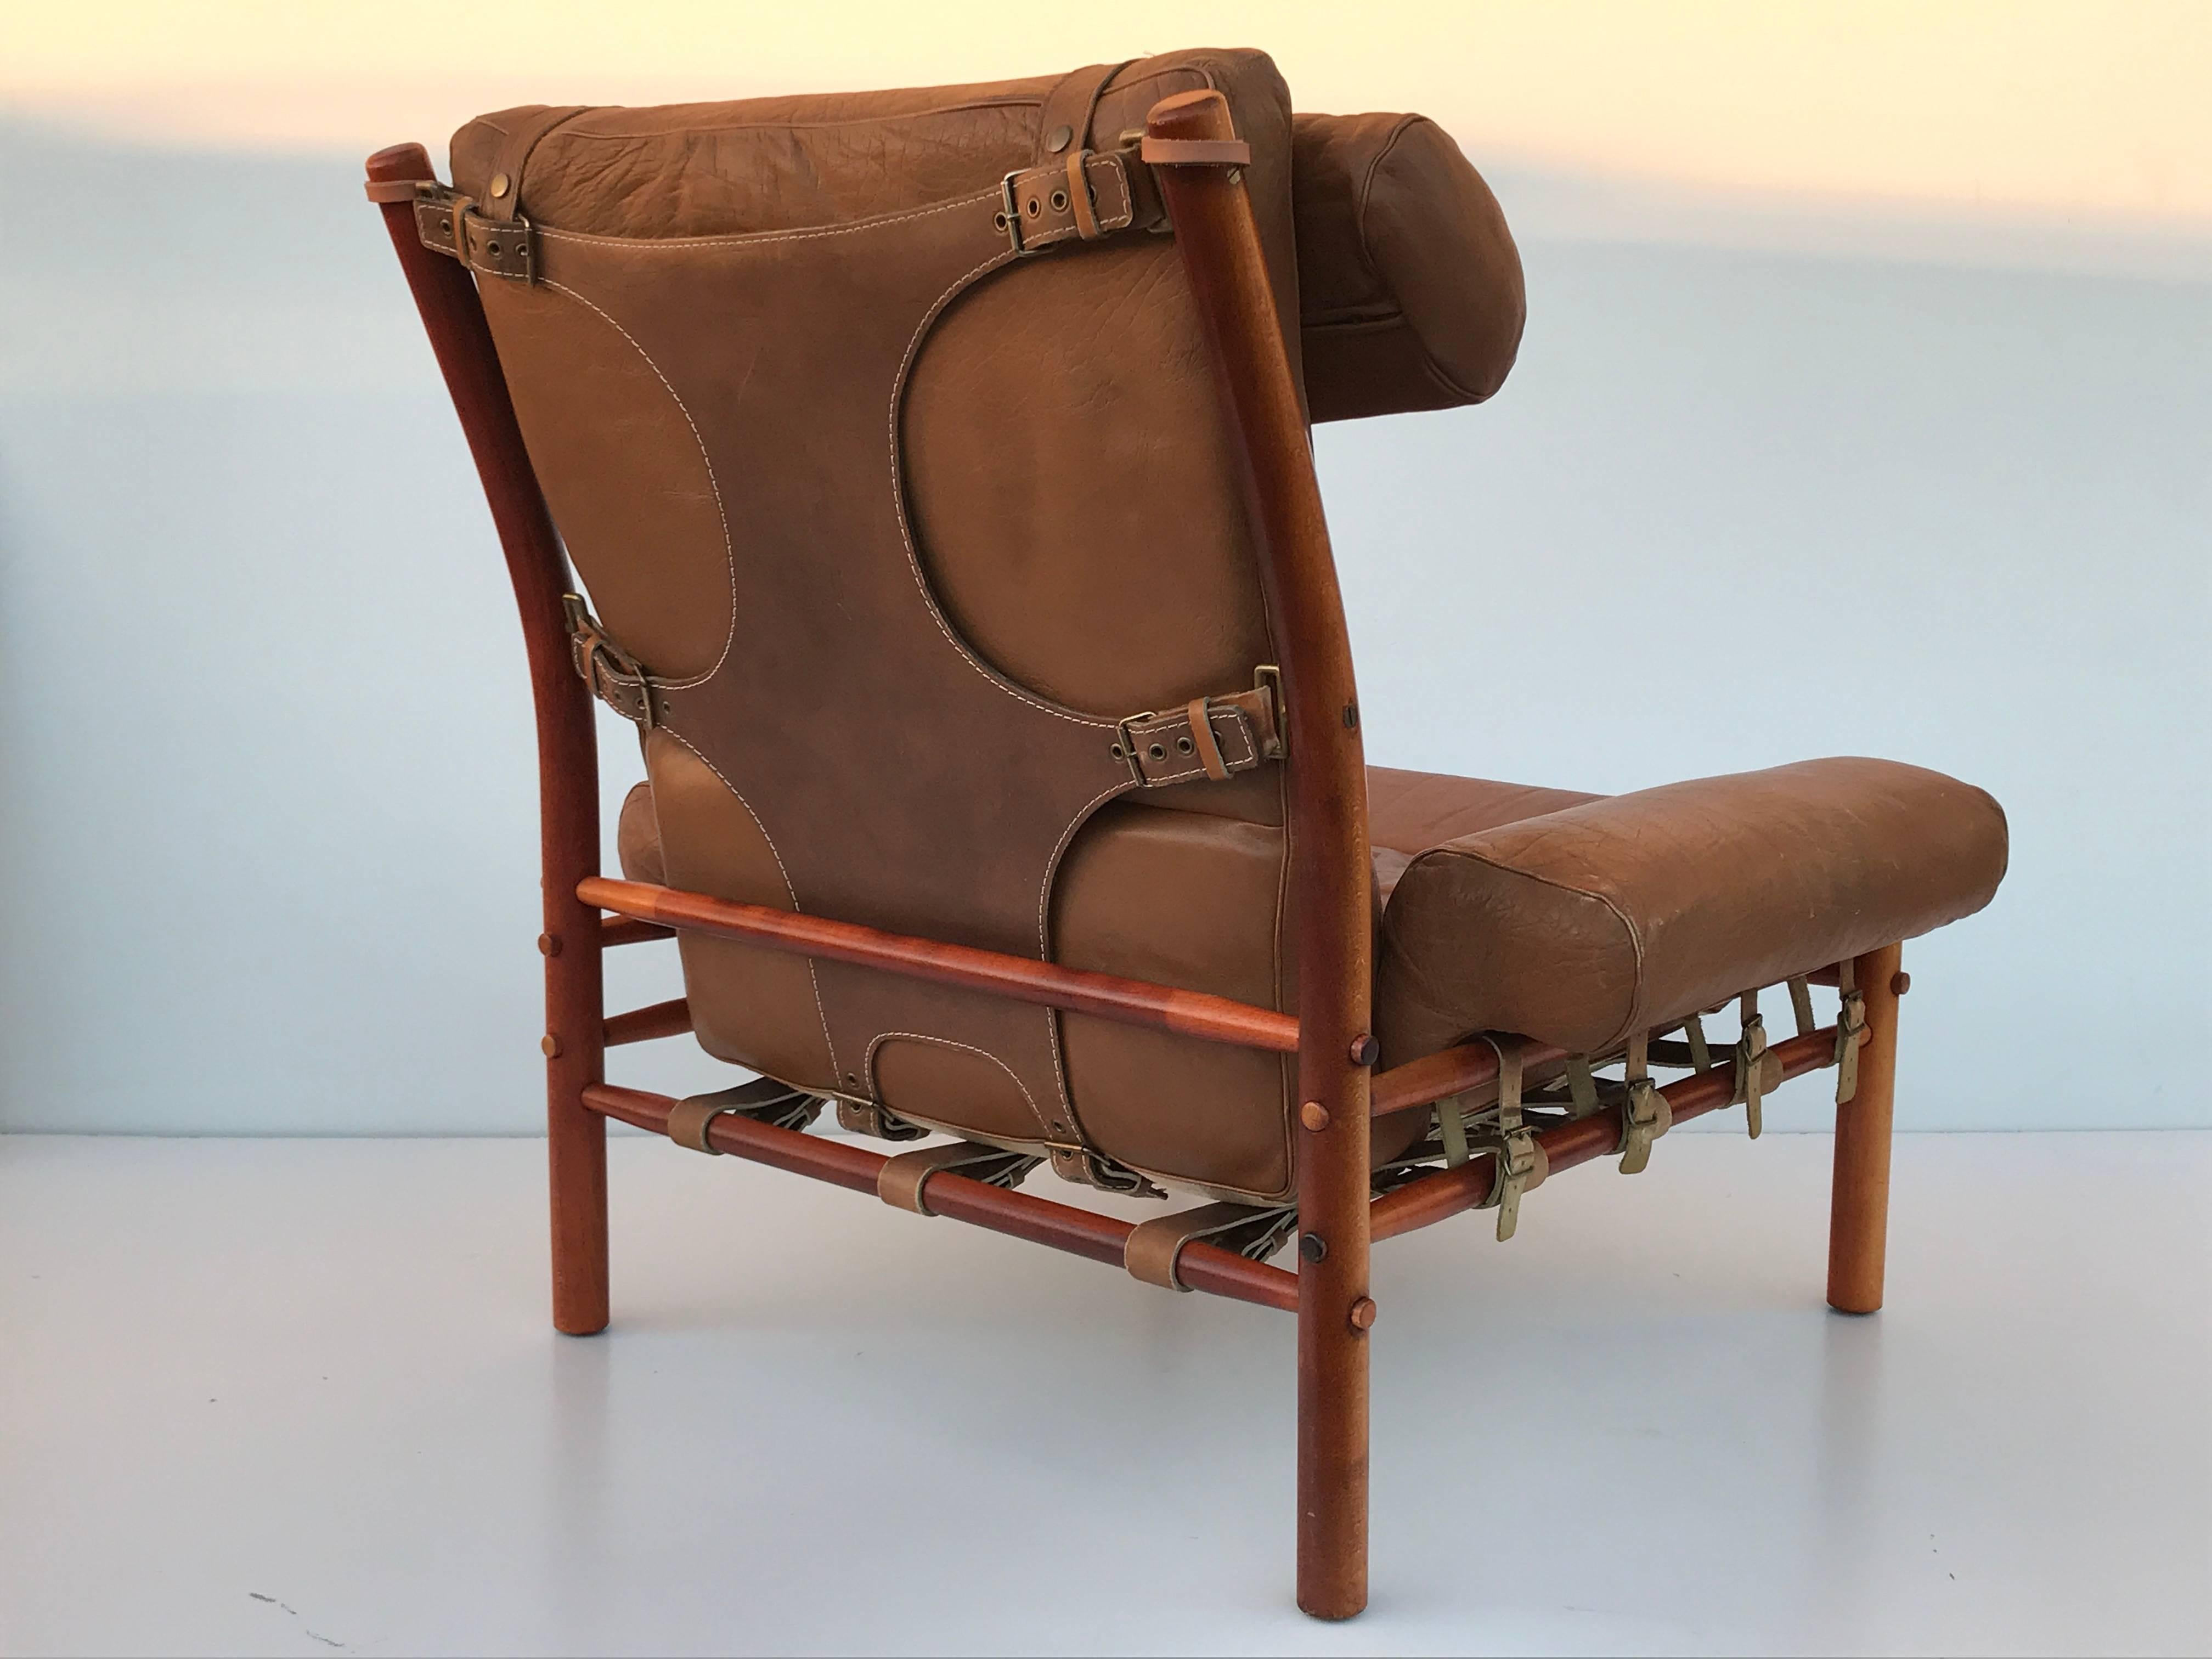 Arne Norell Inca lounge chair and footrest in patinated leather and European beechwood
Measures: Chair is 36